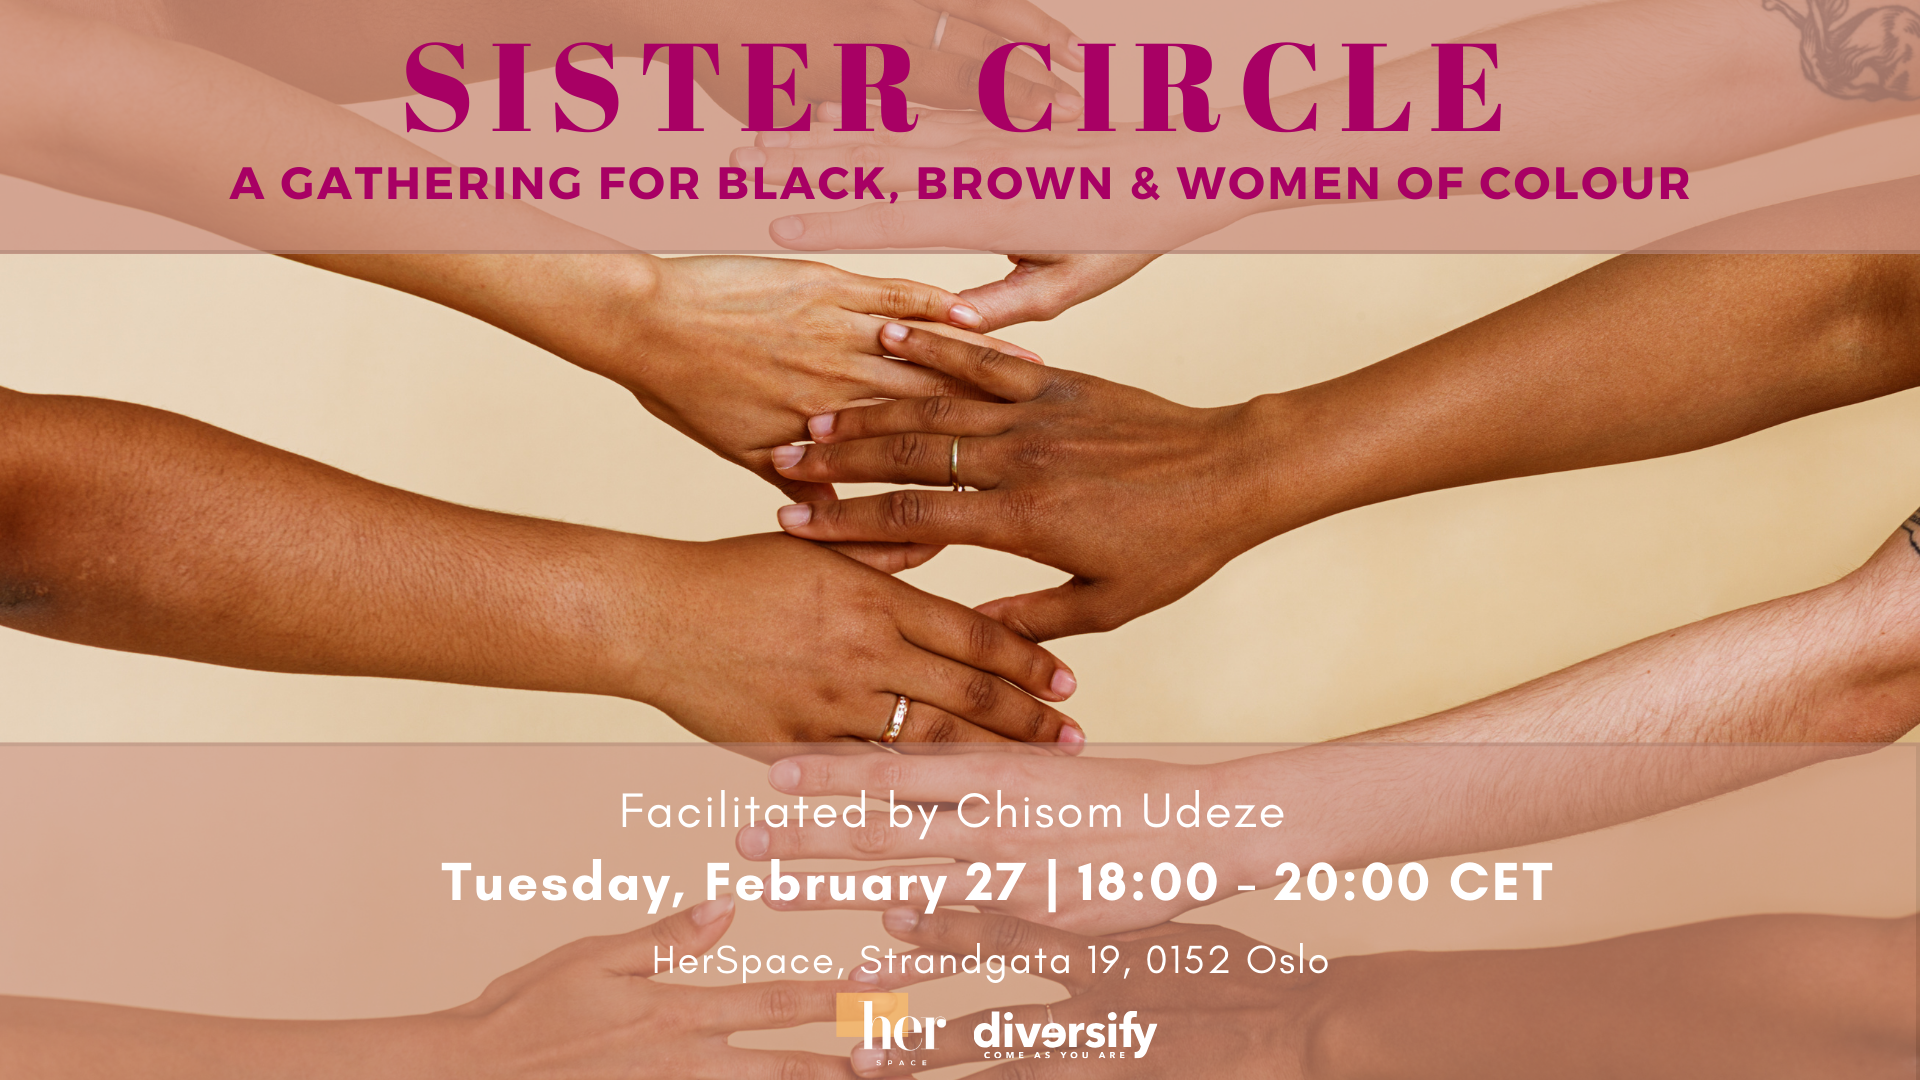 Poster for February 27 Sister Circle with pink text.